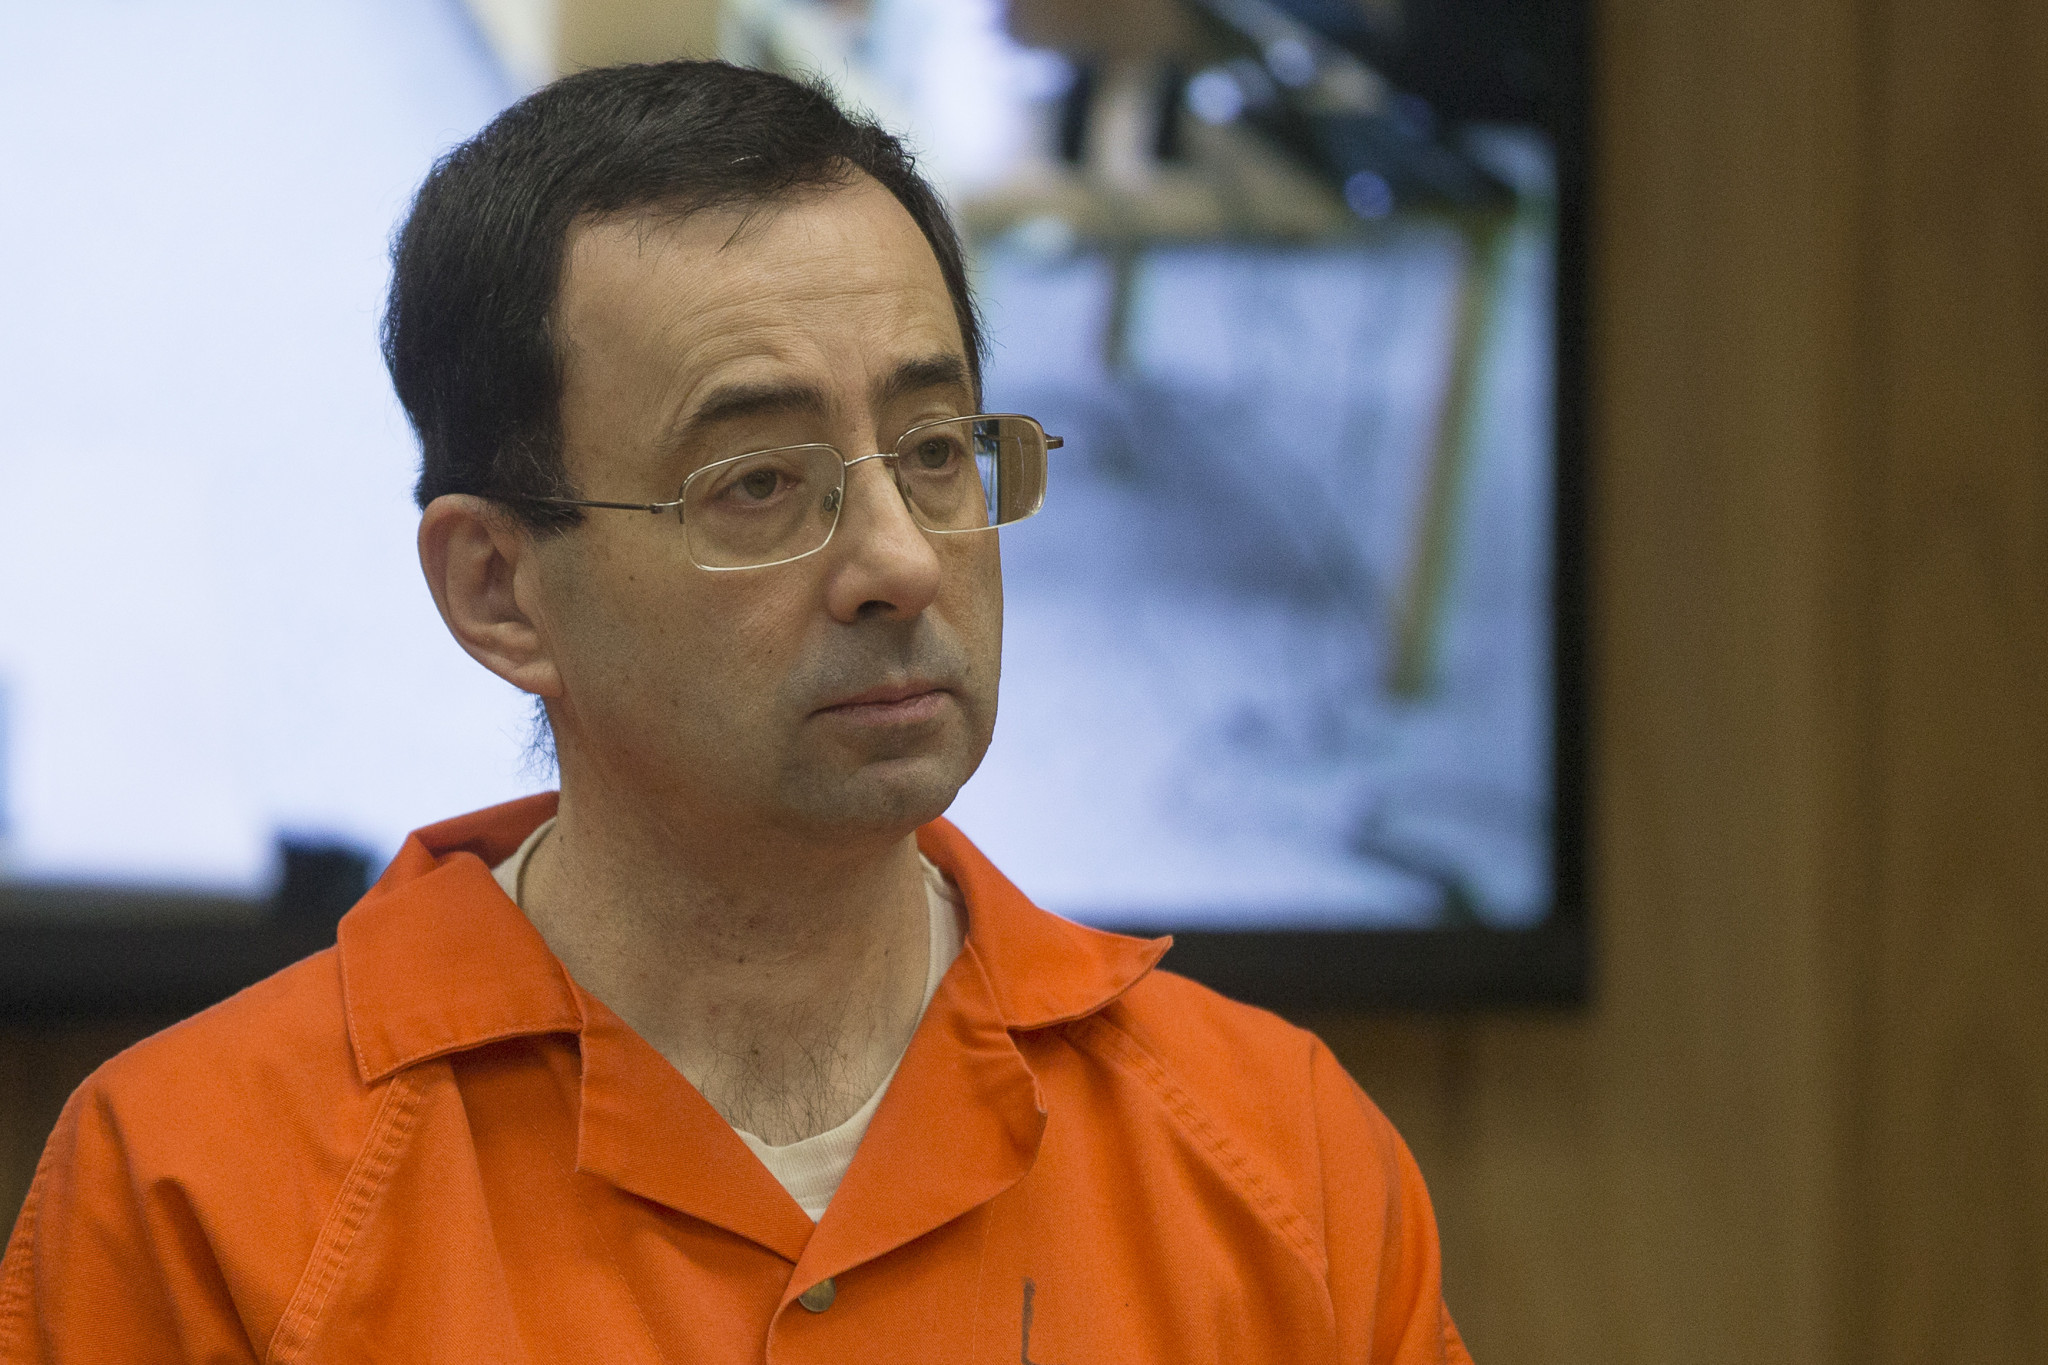 Former USA Gymnastics doctor Larry Nassar was recently sentenced to up to 175 years in prison for sexual abuse offences involving hundreds of girls under his care ©Getty Images